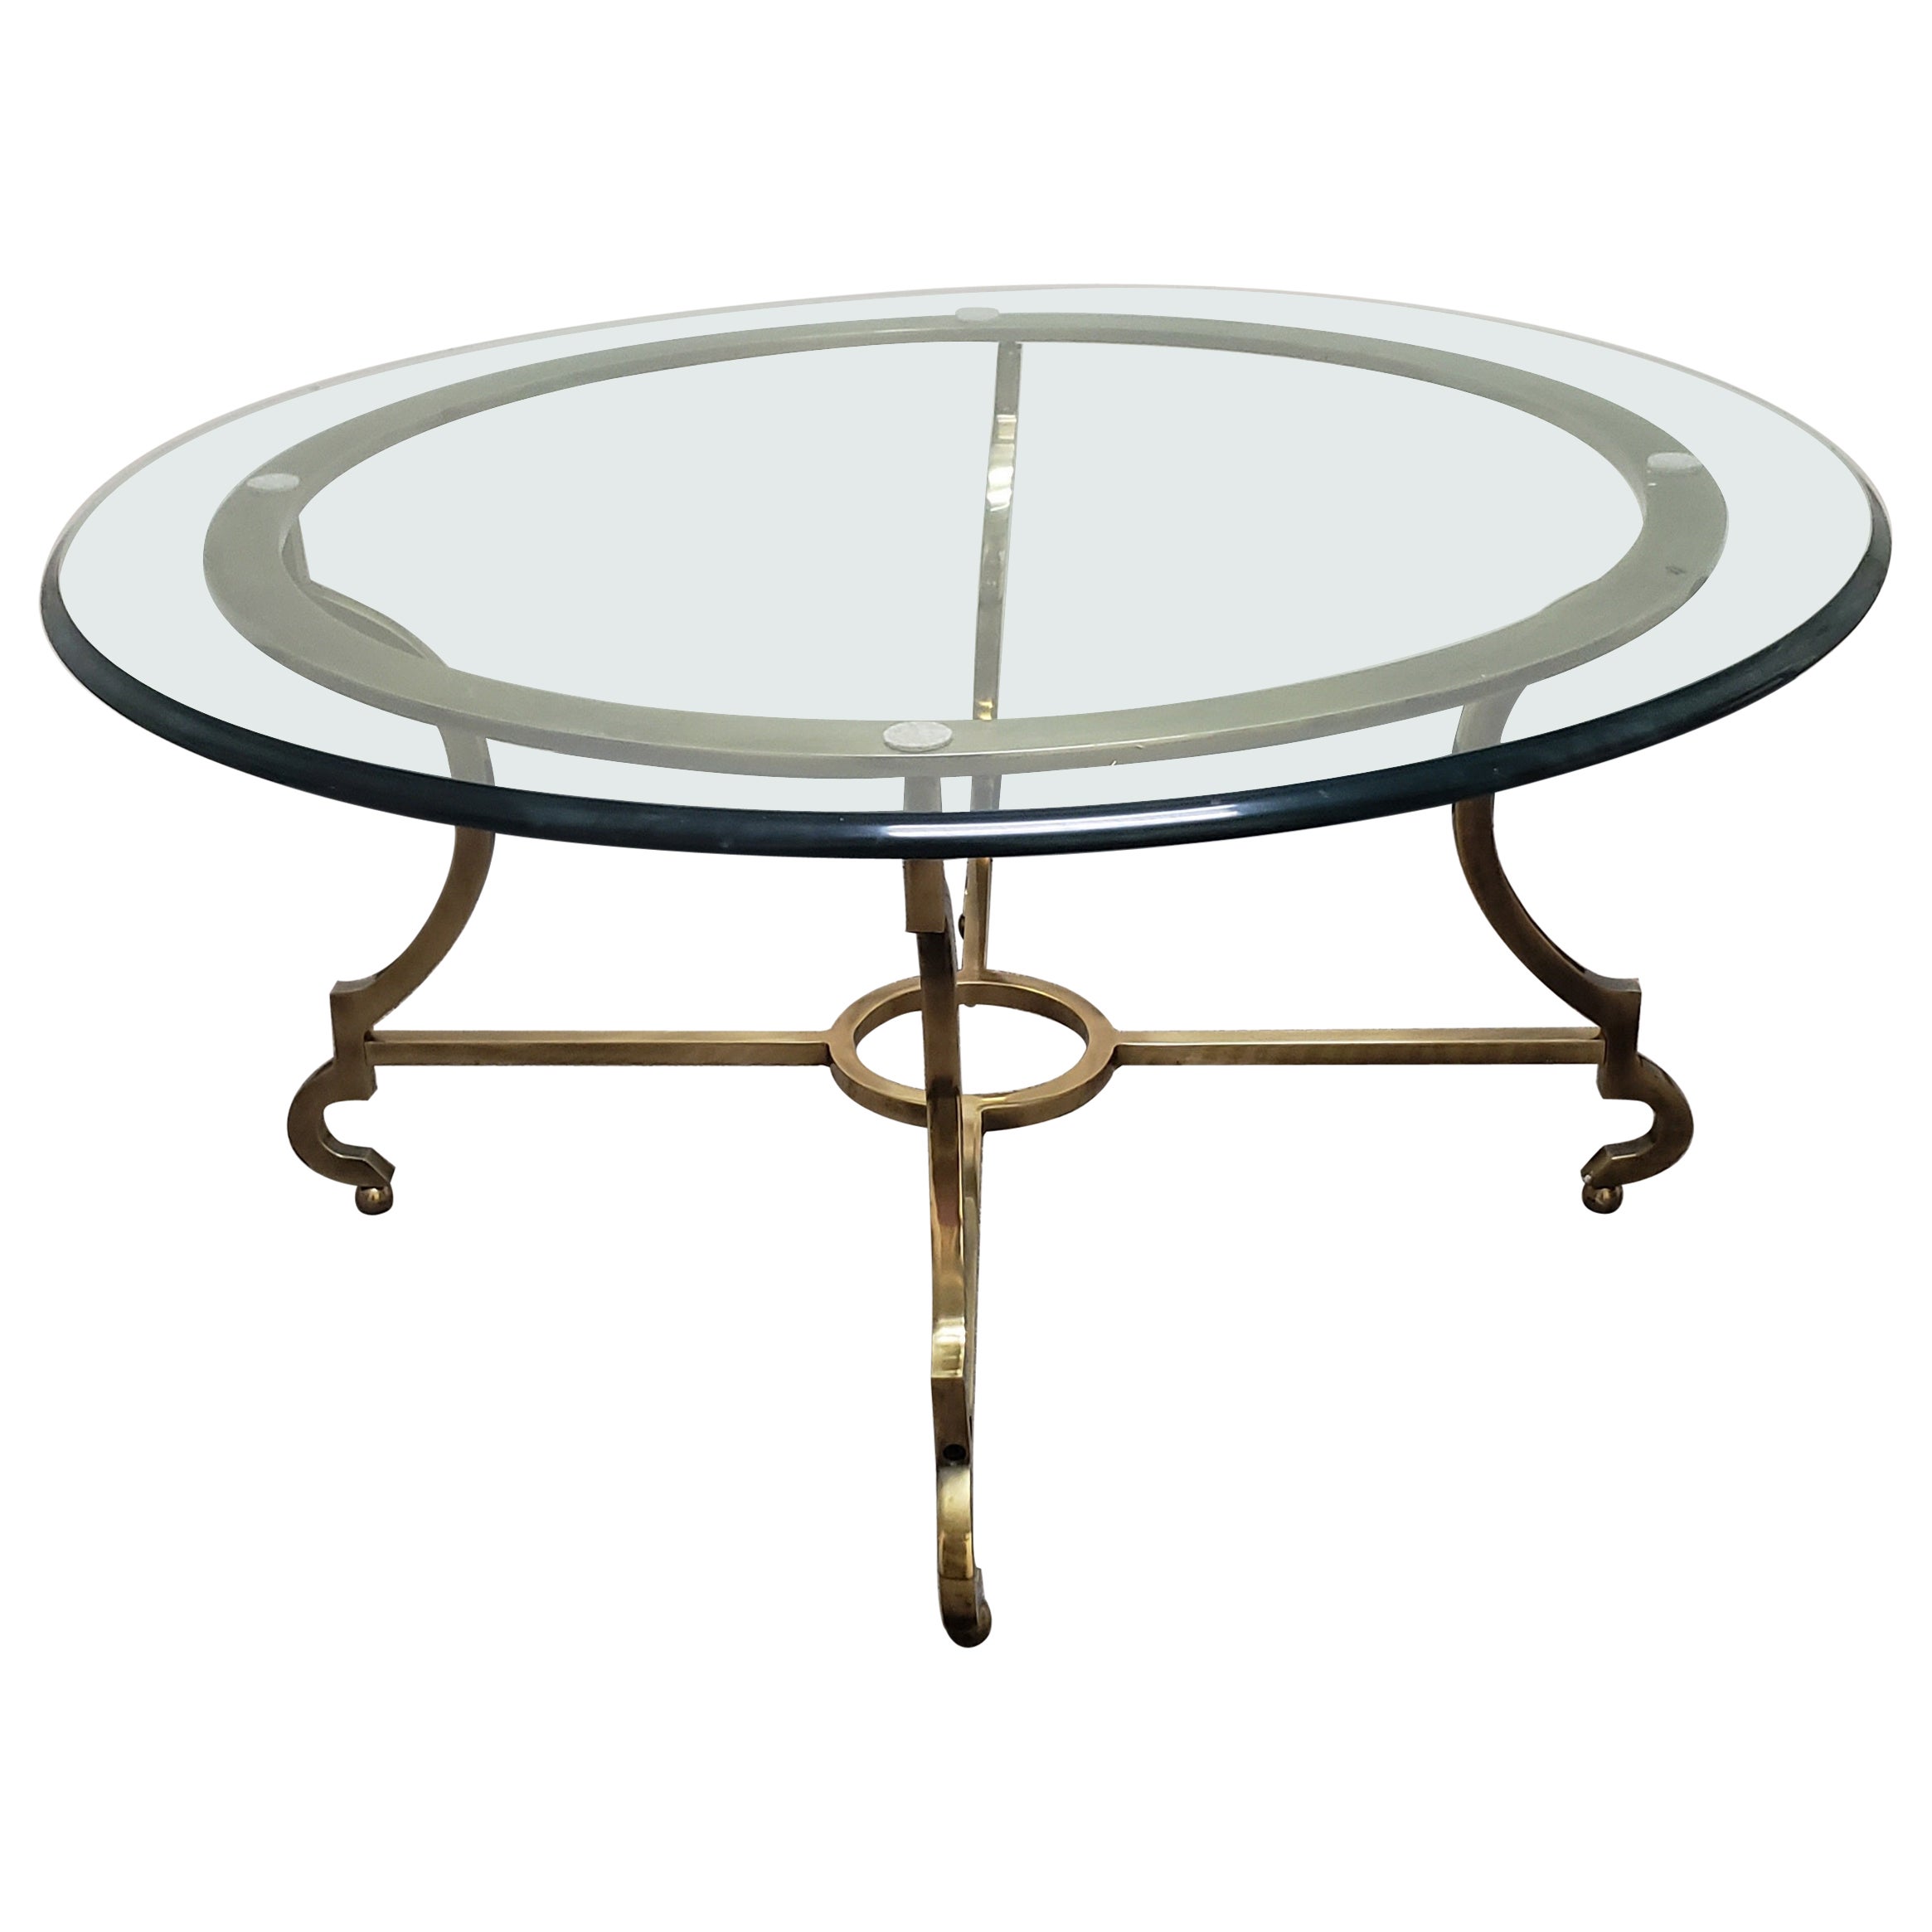 Maison Jansen Round Solid Brass and Ogee Glass Top Cocktail Coffee Table